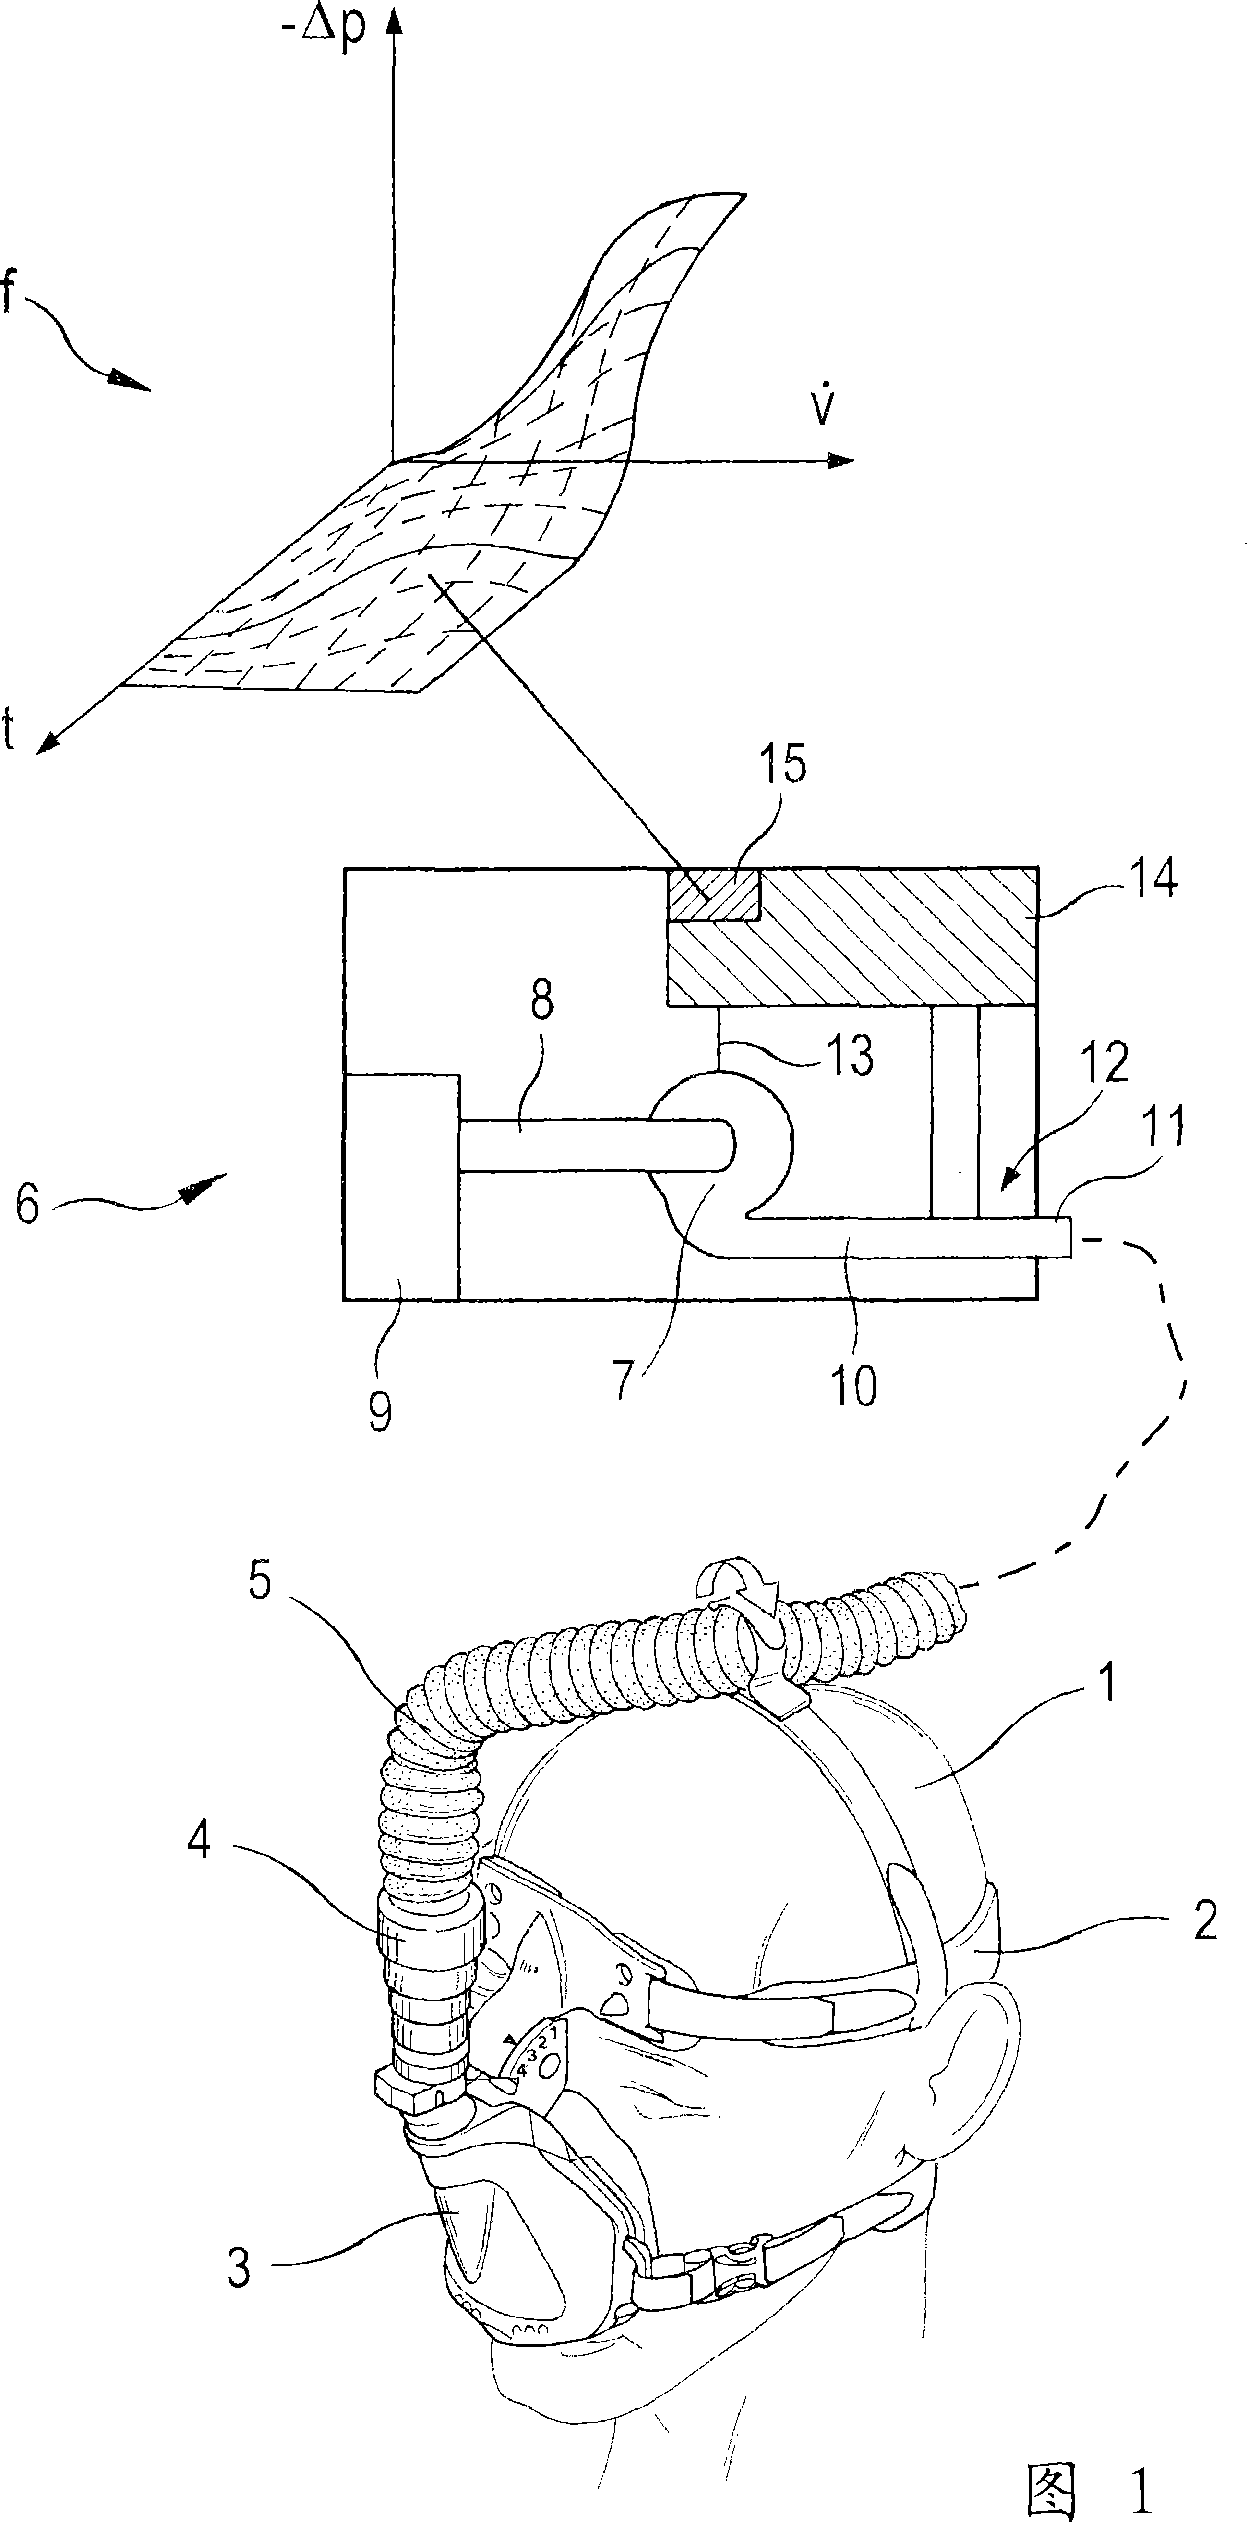 Device for administering a breathing gas and method for adjusting breathing gas pressures that alternate at least in some phases